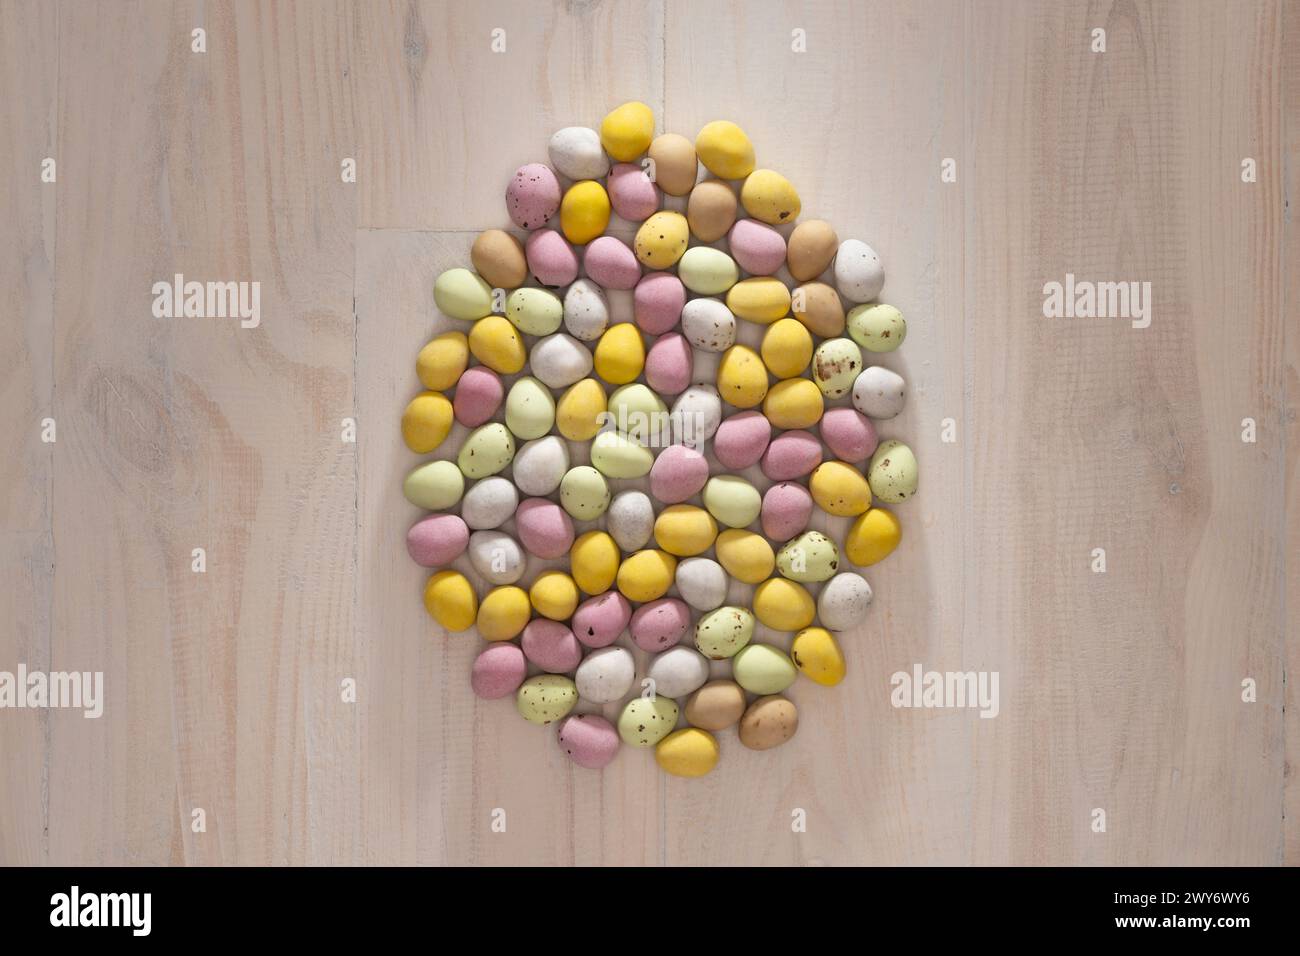 Sugar-coated mini eggs, in pastel colours, arranged in an egg shape on a wooden background. Stock Photo